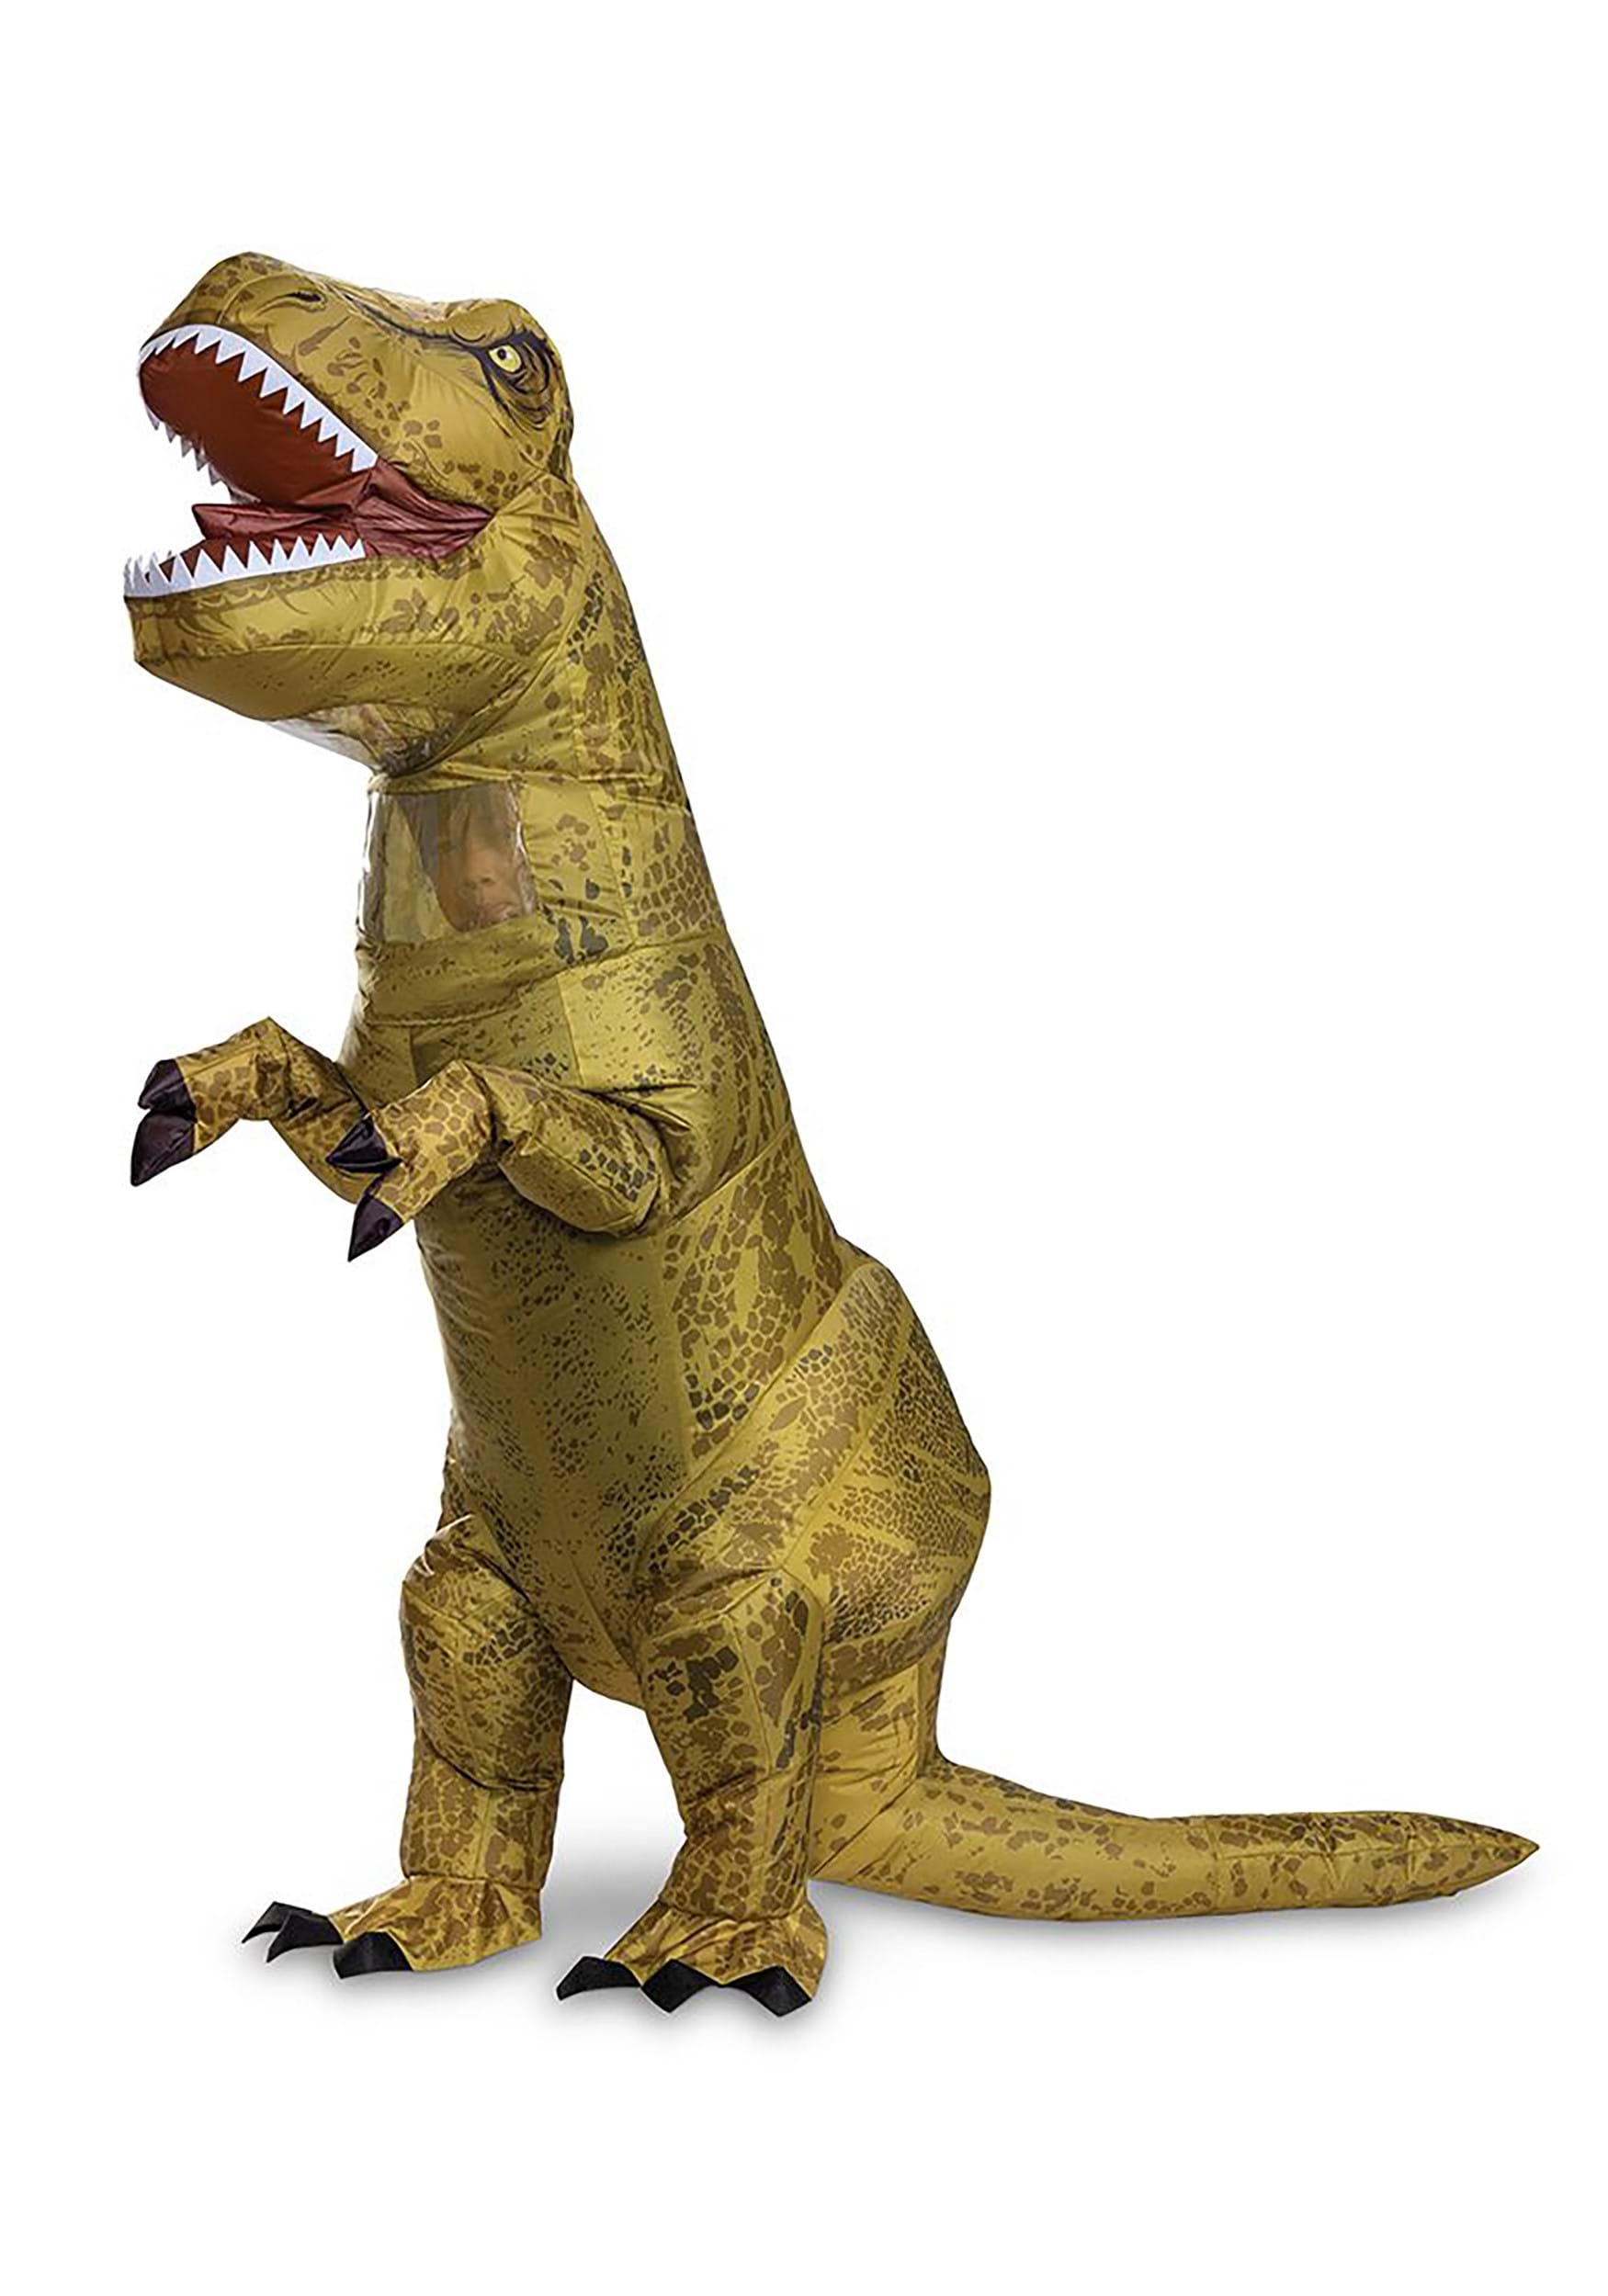 Image of Jurassic World T-Rex Inflatable Costume for Kids ID DI145169CH-ST